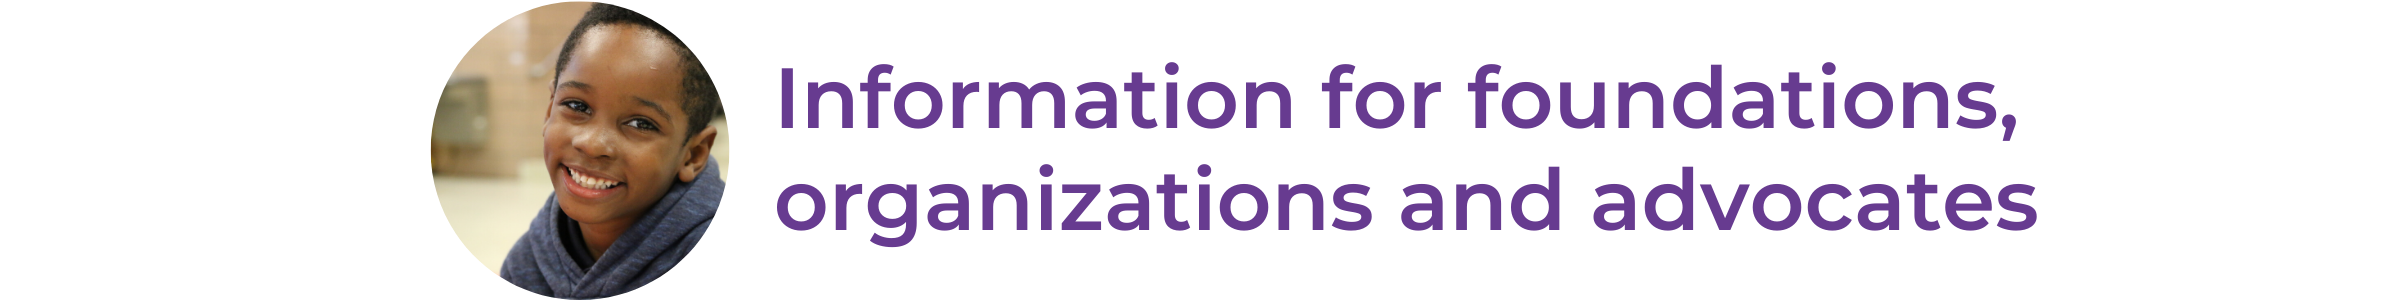 Information for foundations, organizations and advocates